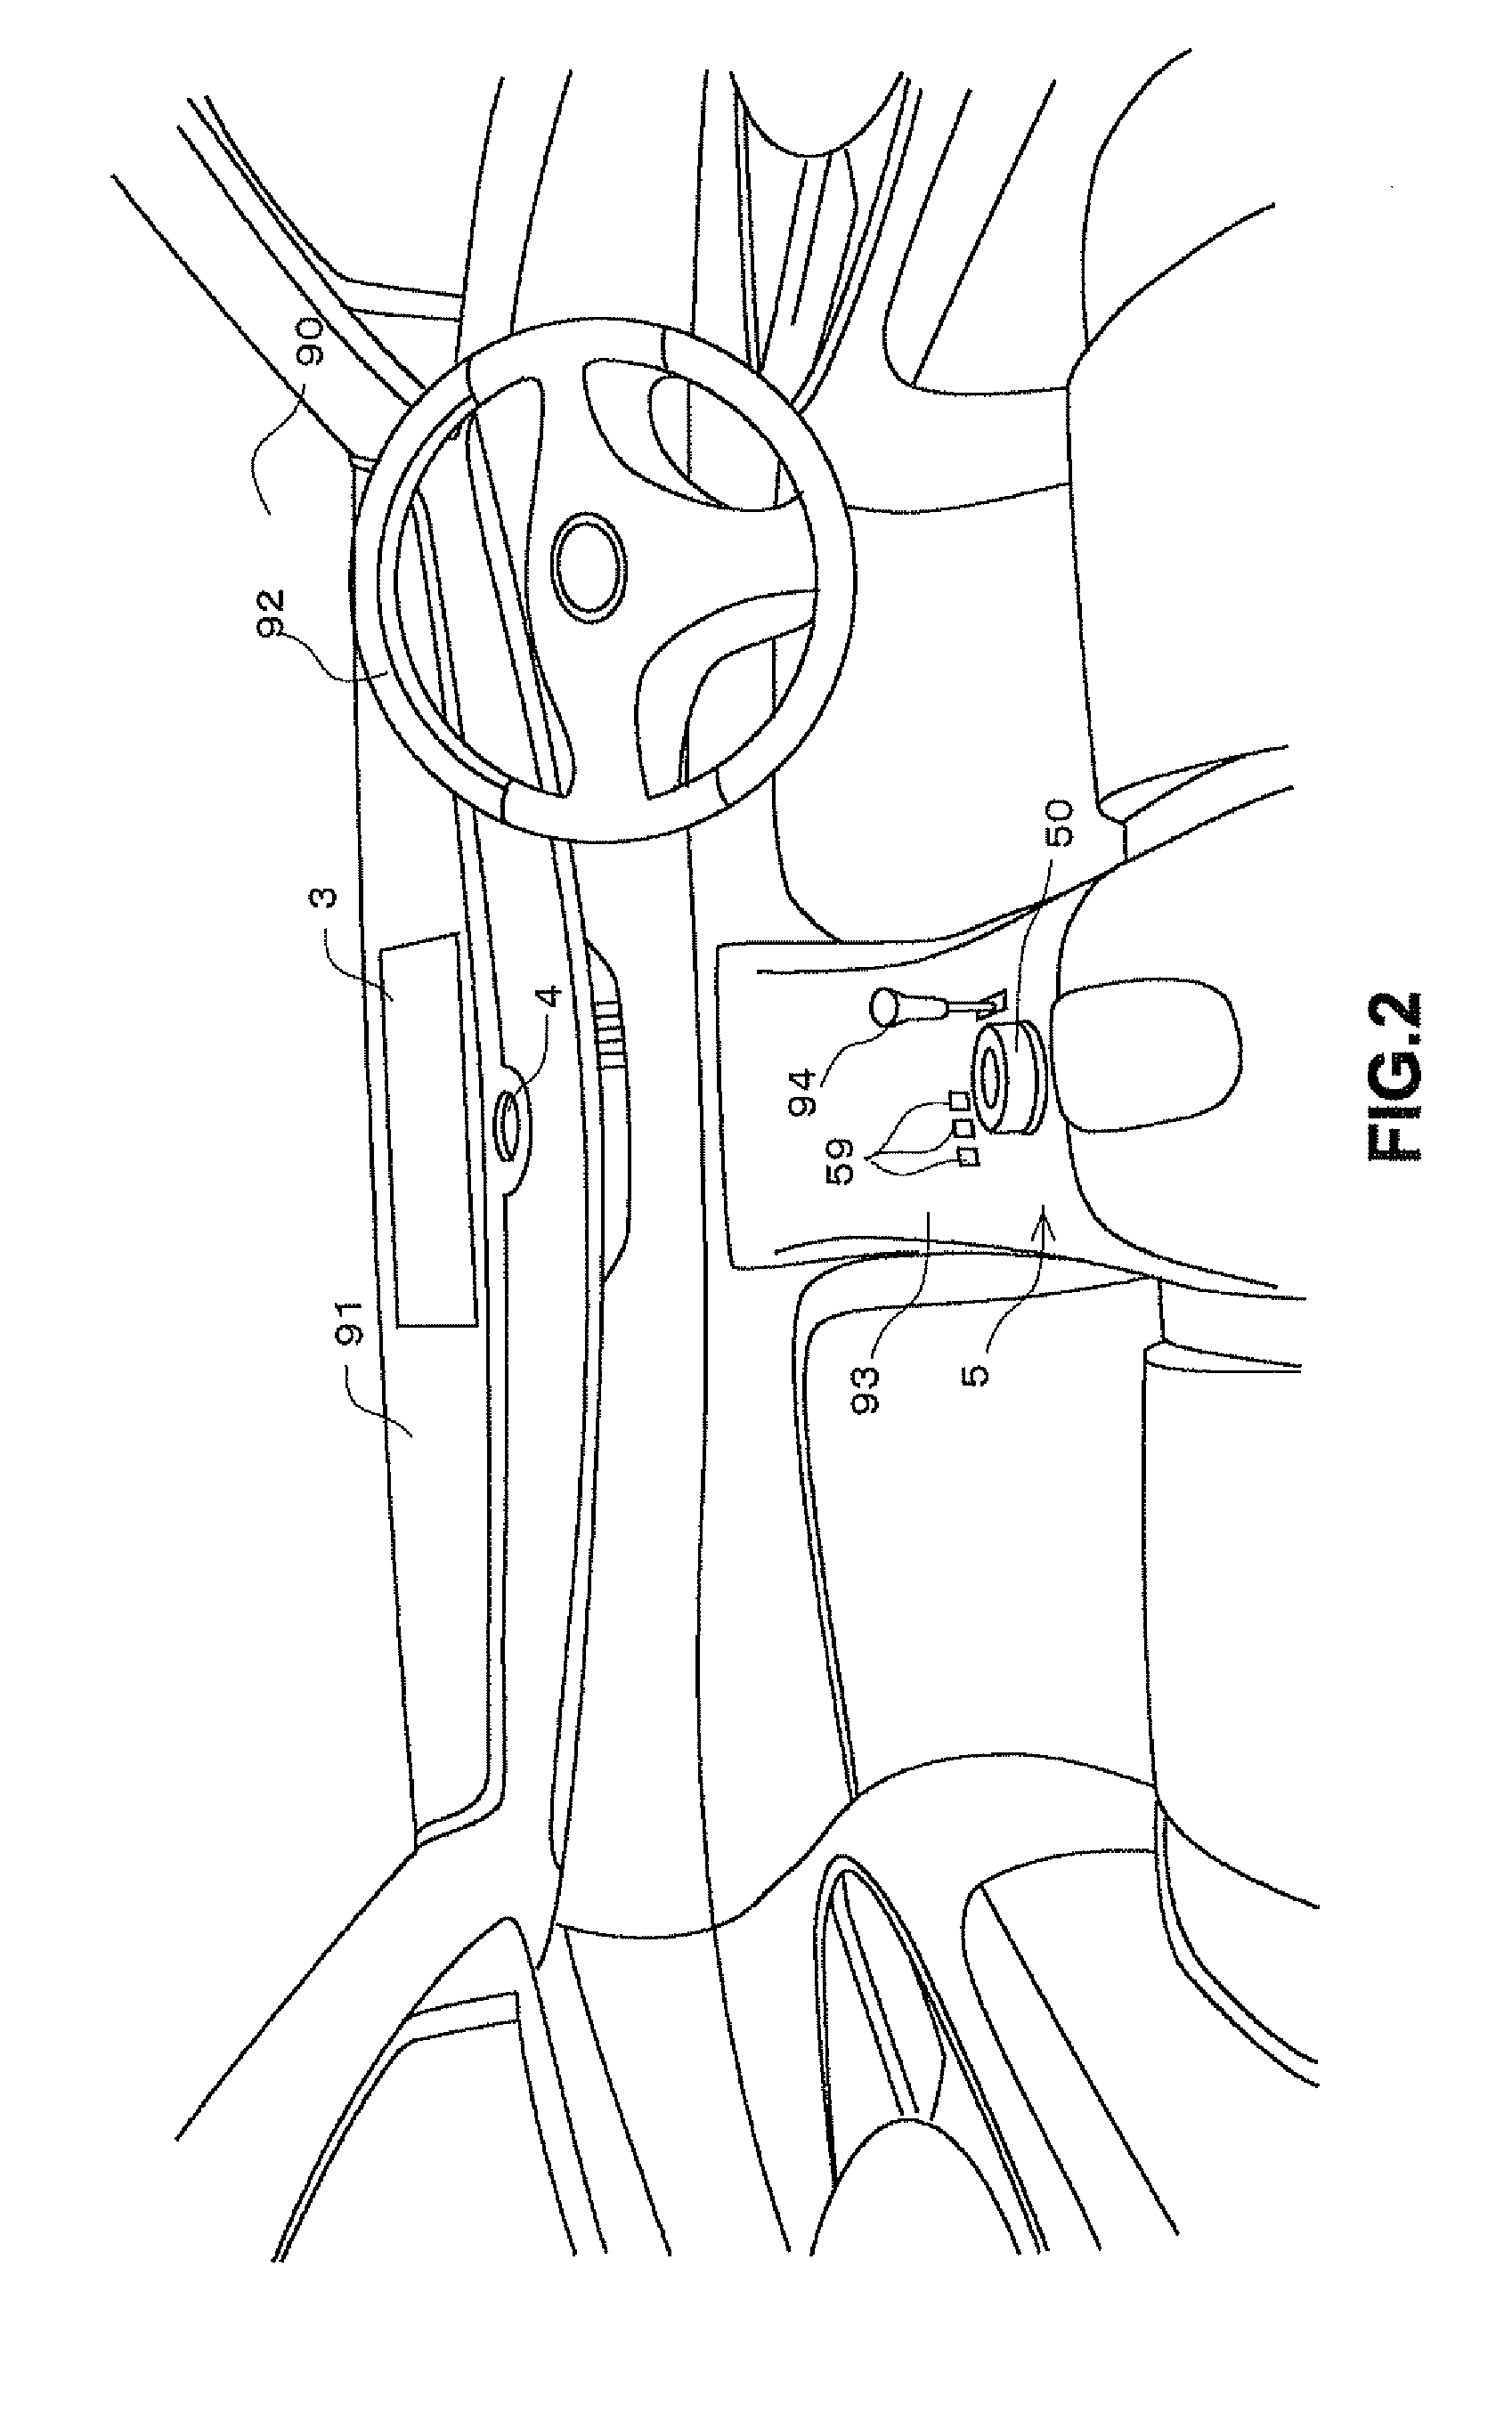 In-vehicle display system